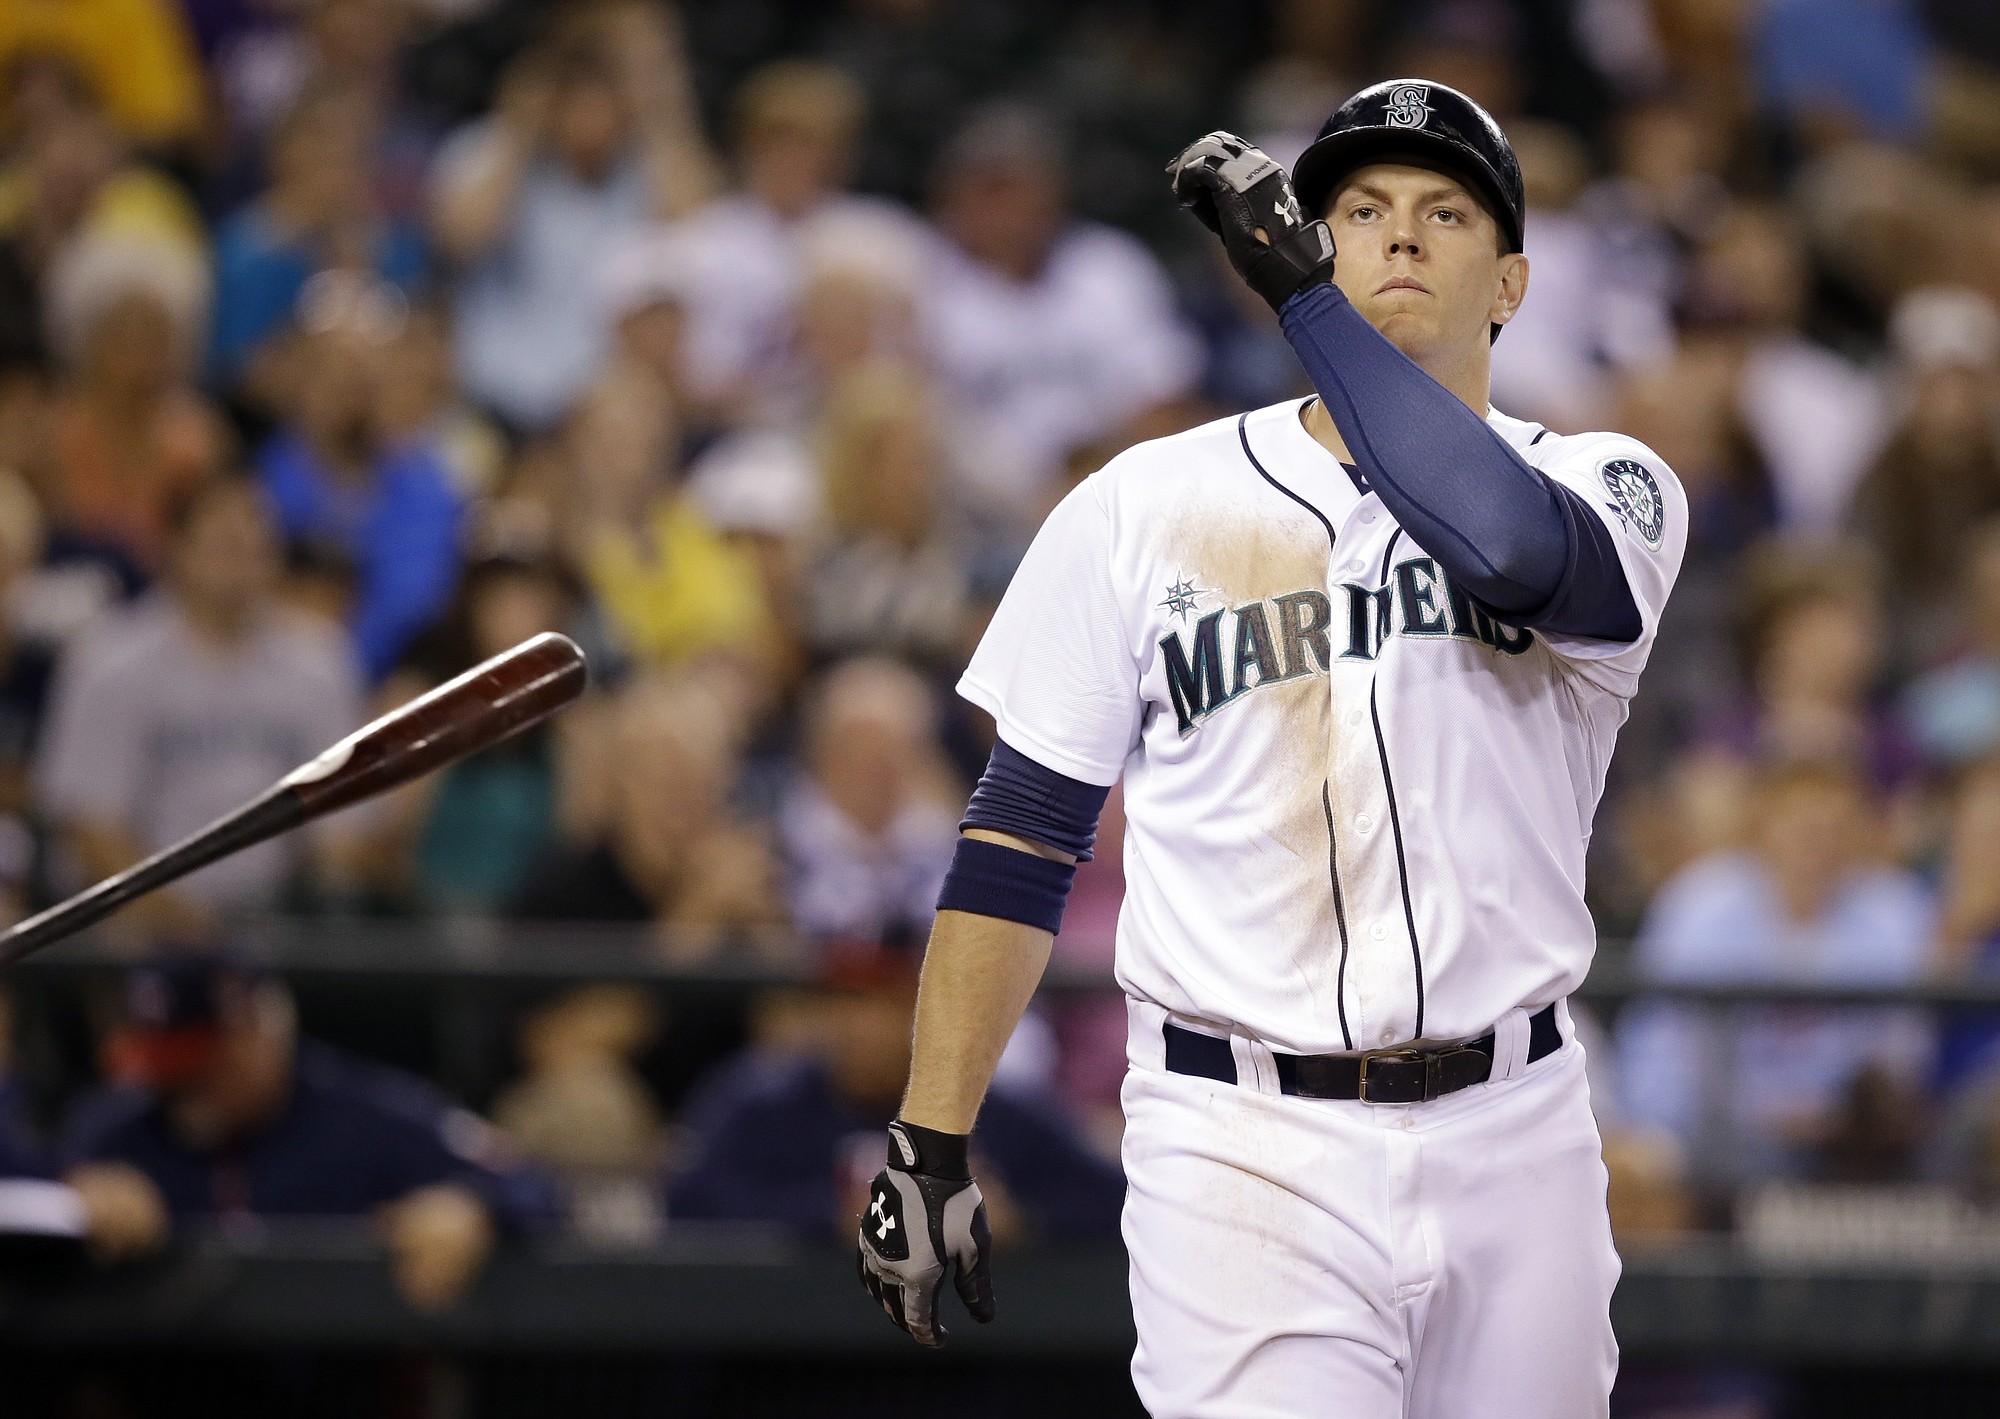 Seattle Mariners' Logan Morrison tosses aside his bat after striking out looking to end the seventh inning against the Minnesota Twins in a baseball game Wednesday, July 9, 2014, in Seattle.